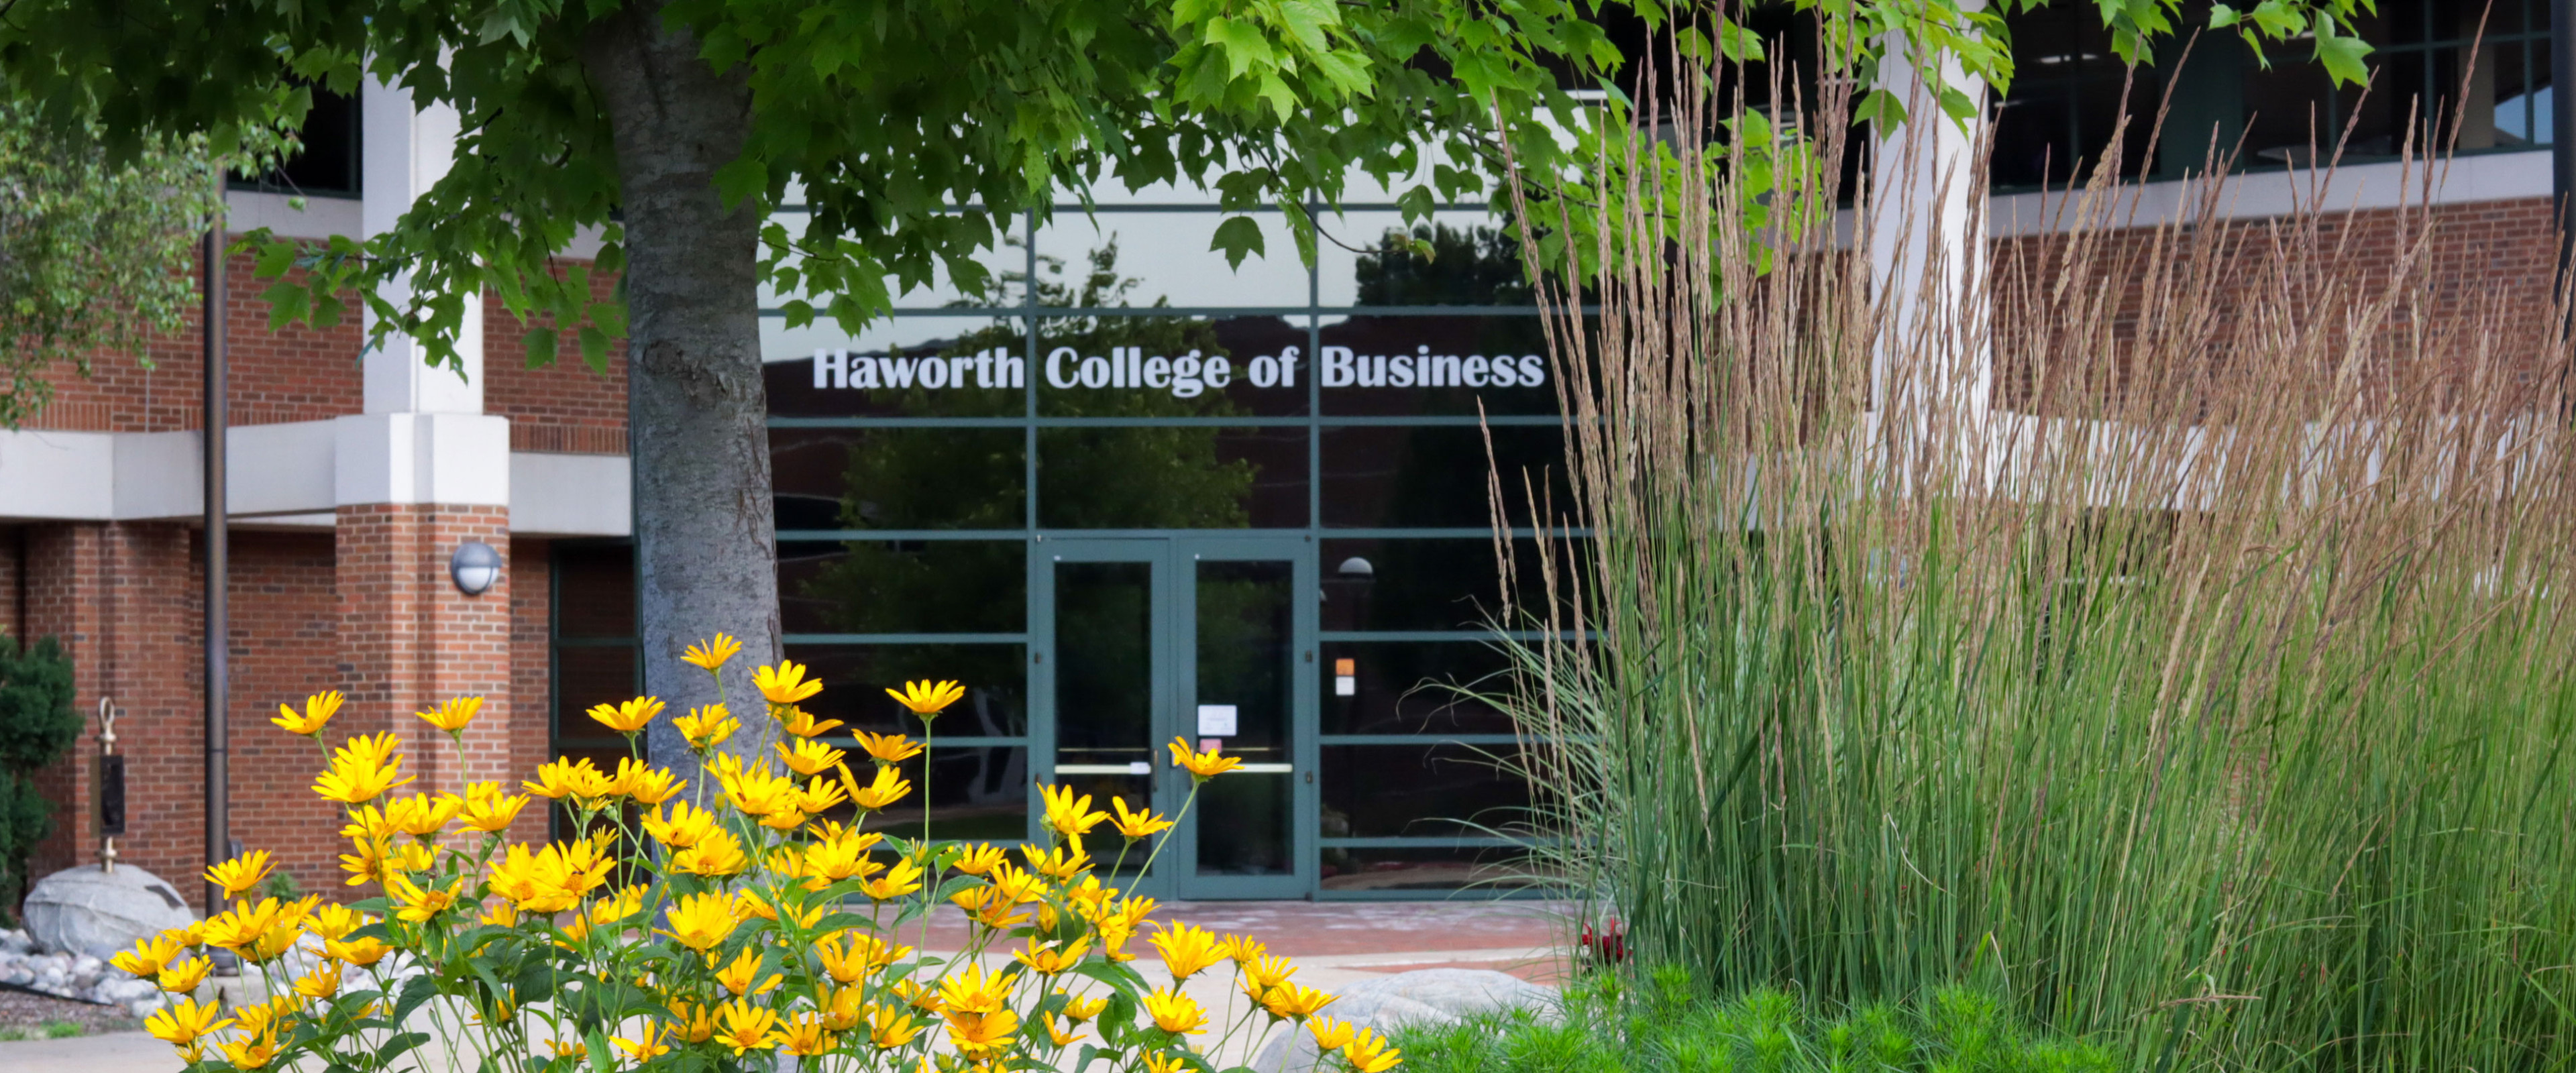 Photo of door to Haworth College of Business with flowers blooming.